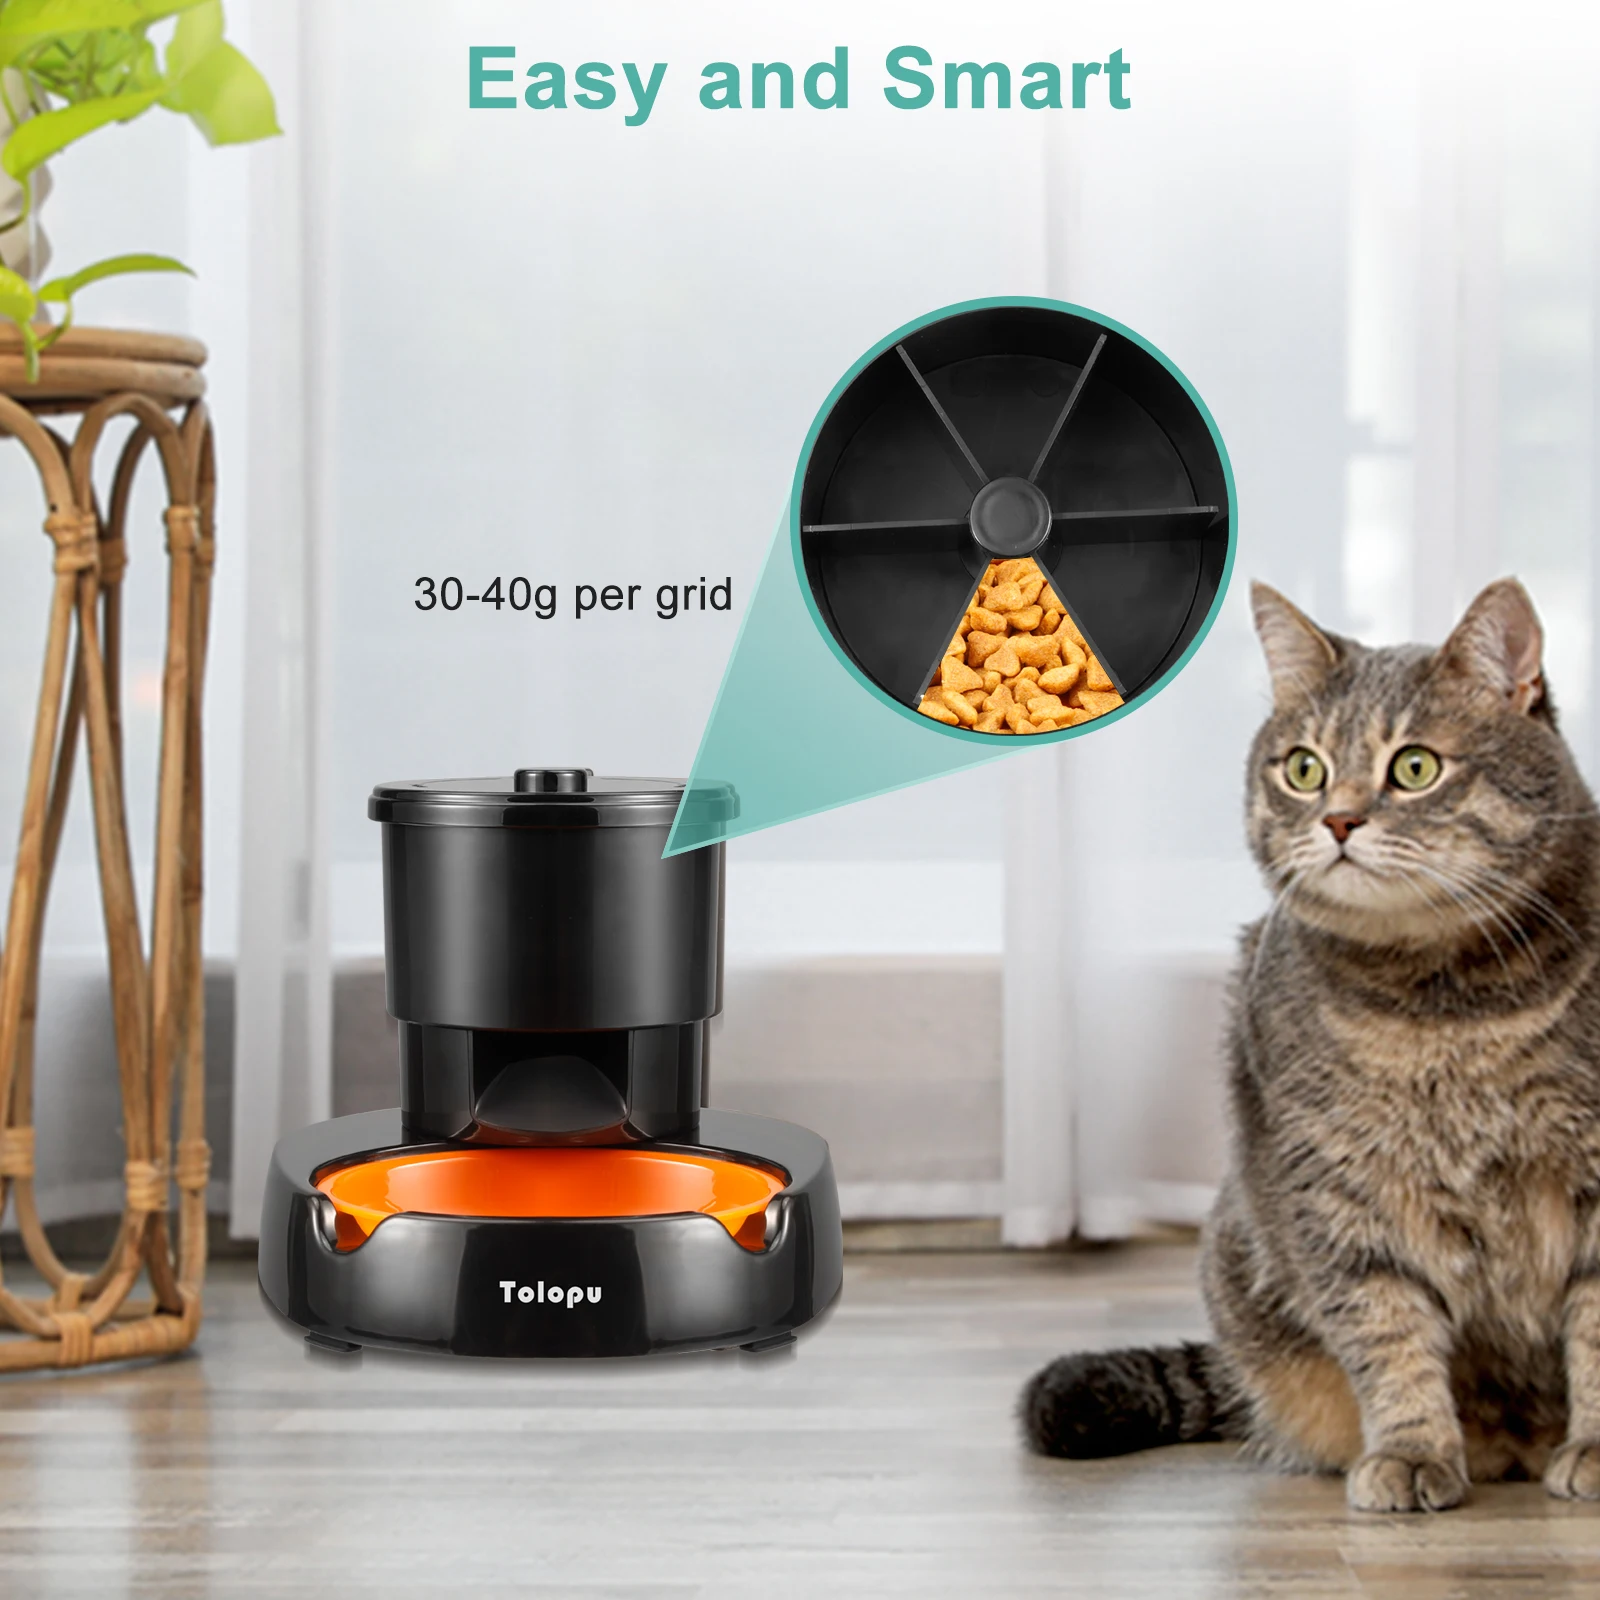 Tolopu easy and fashion  design Smart pet feeder bowl timing  automatic food dispenser by  APP WIFI for travel short journeys